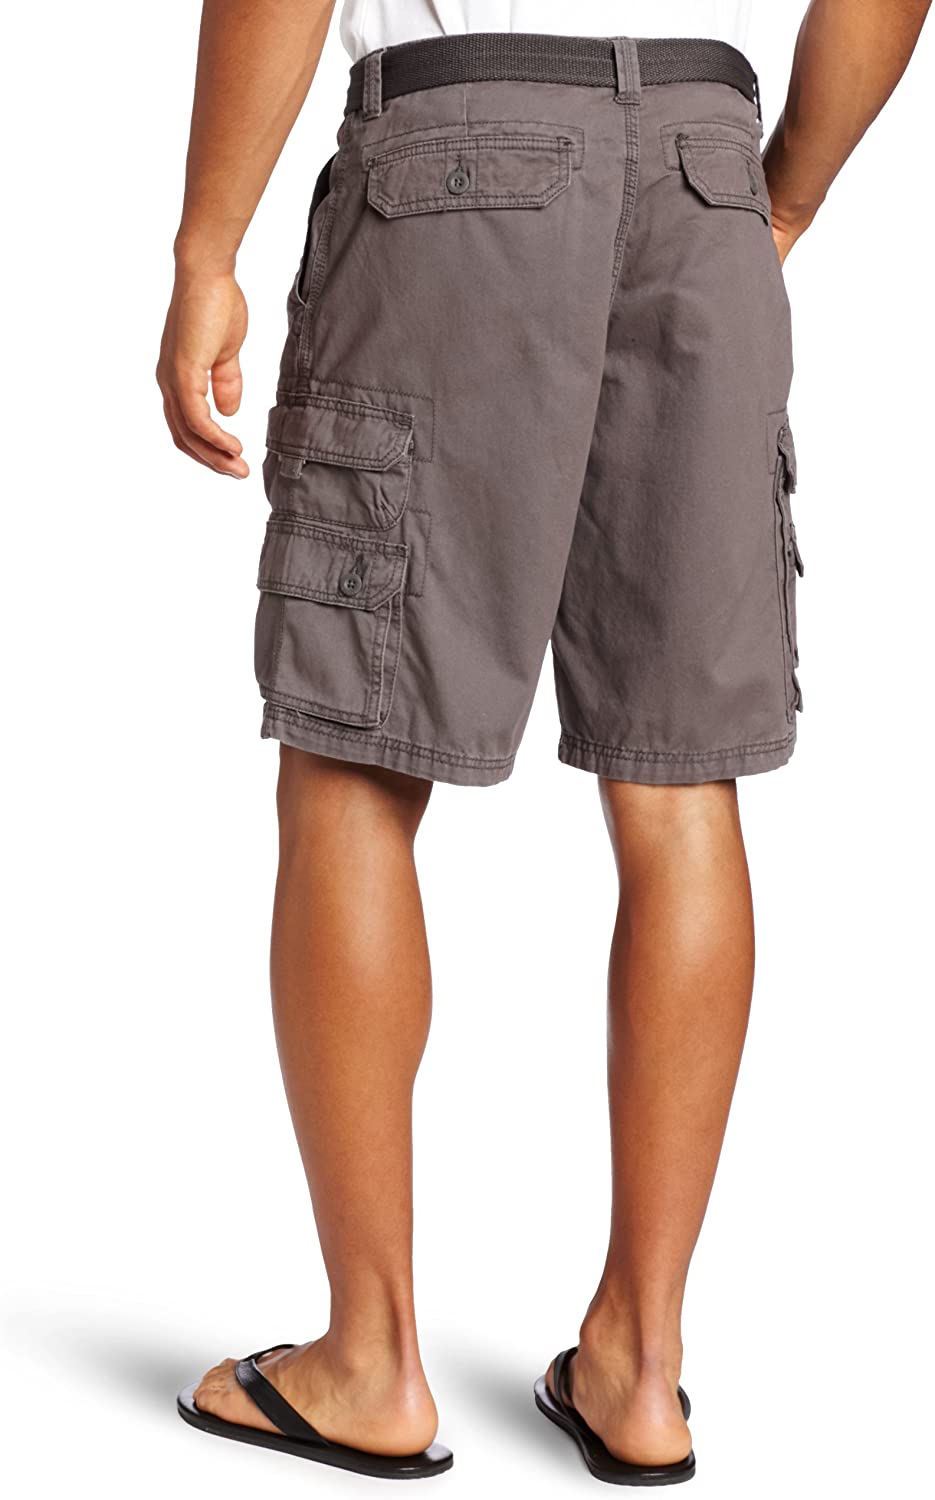 Lee Men's Big & Tall Dungarees Belted Wyoming Cargo Short